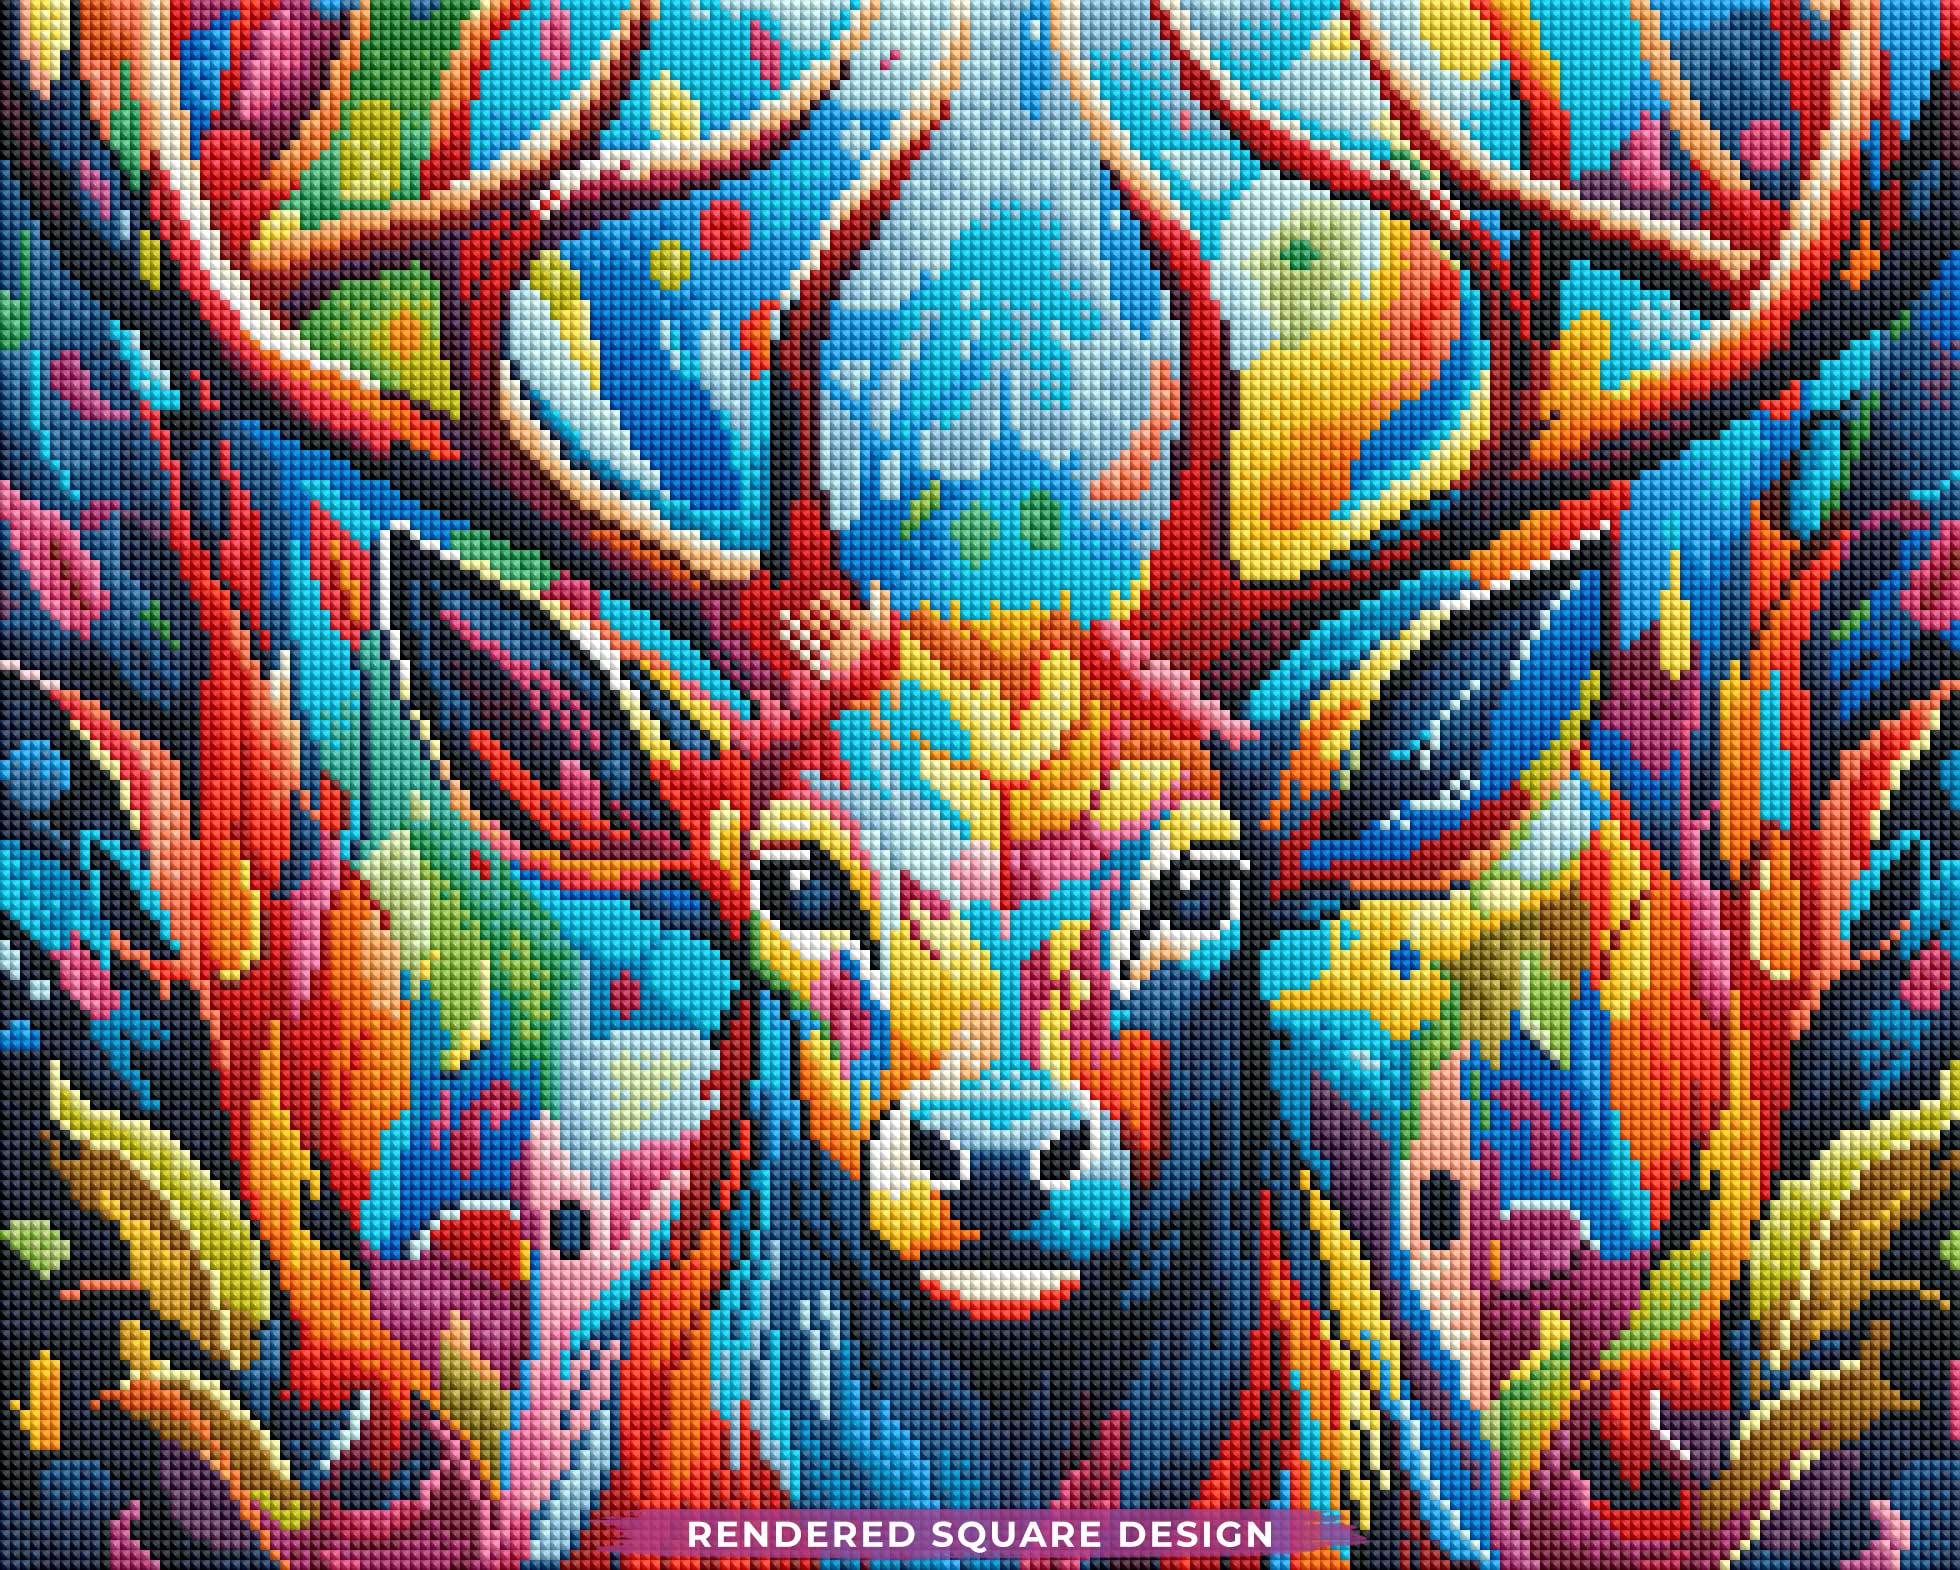 Colorful Stag